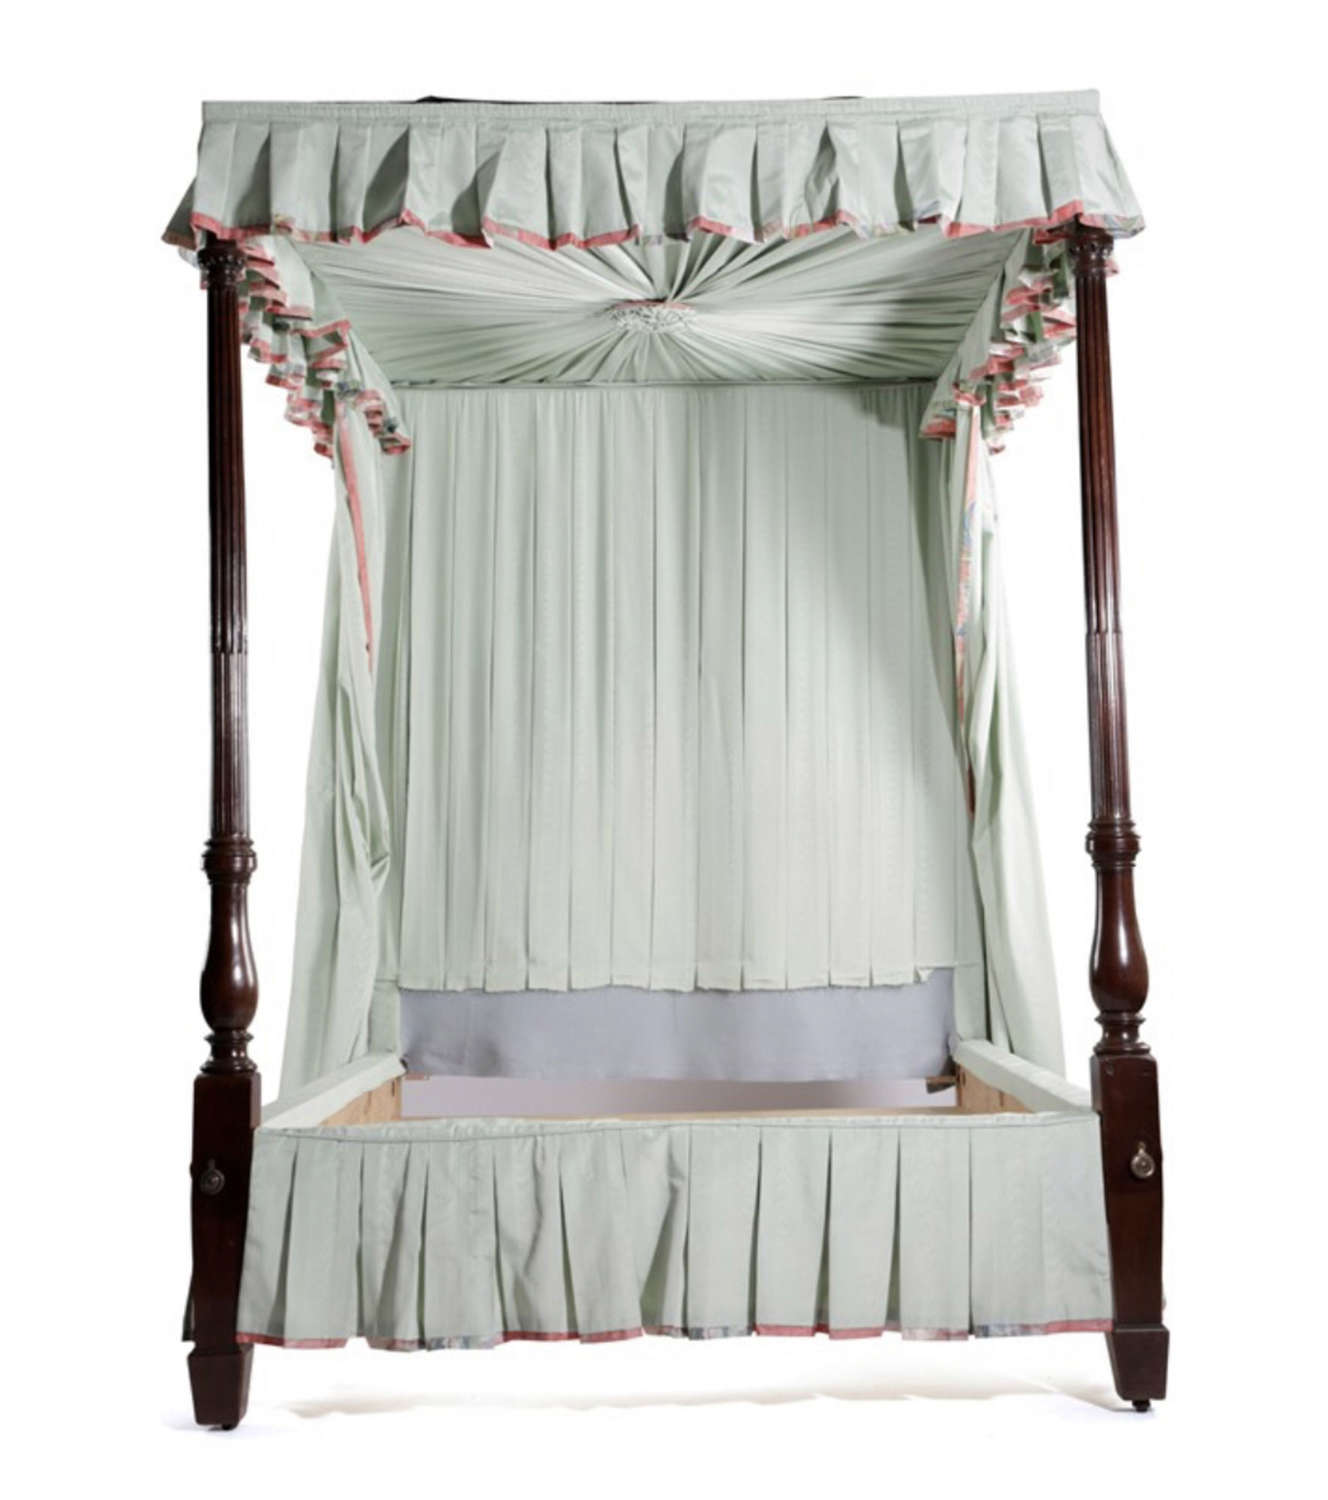 A MAHOGANY FOUR POSTER BED